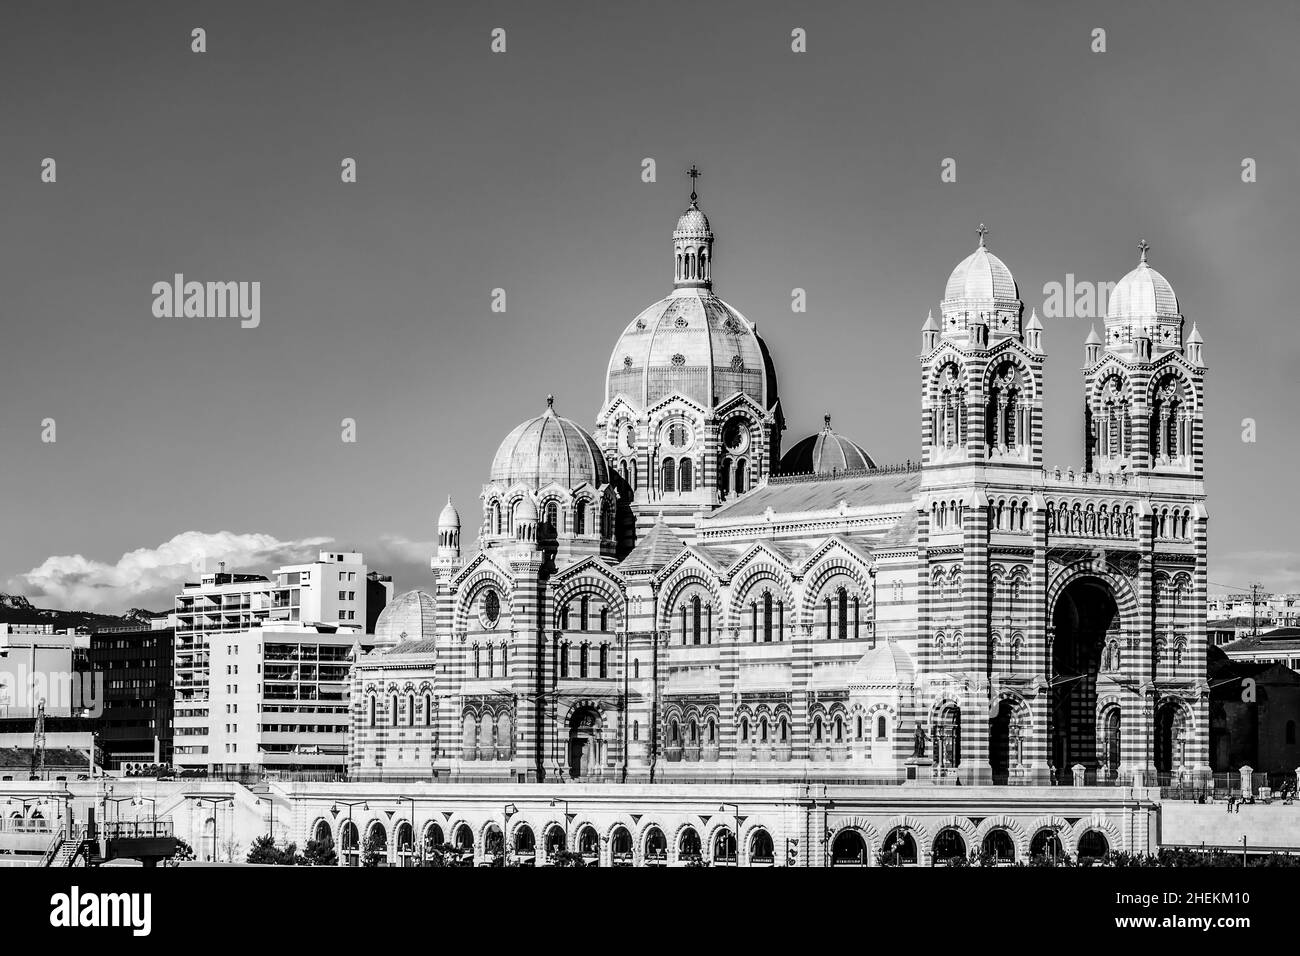 marseille Cathedral of Saint Mary Major on a sunny day Stock Photo